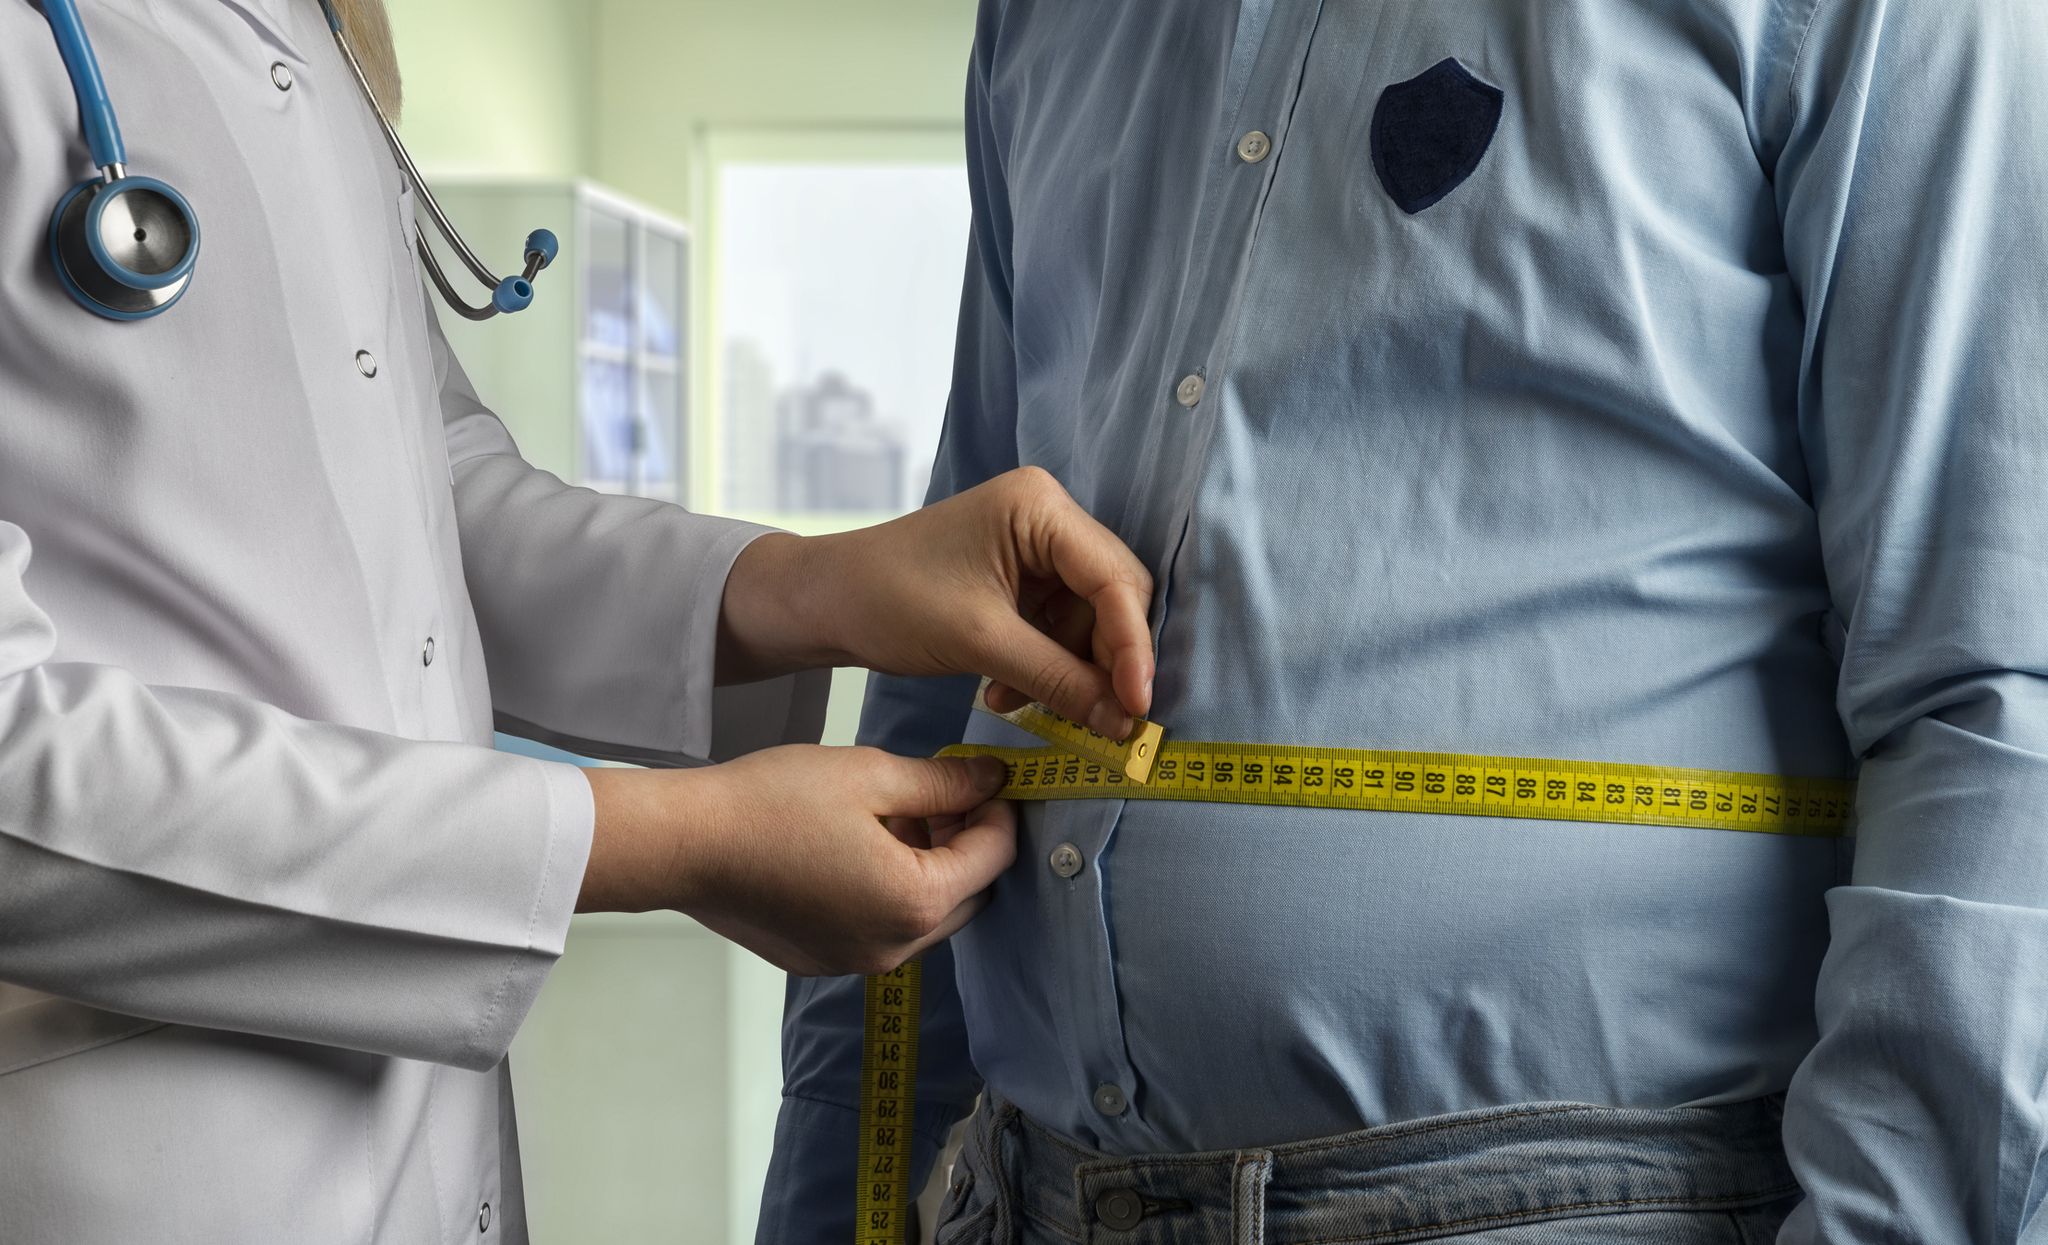 Lose weight, watch waist size to reduce Type 2 diabetes risk